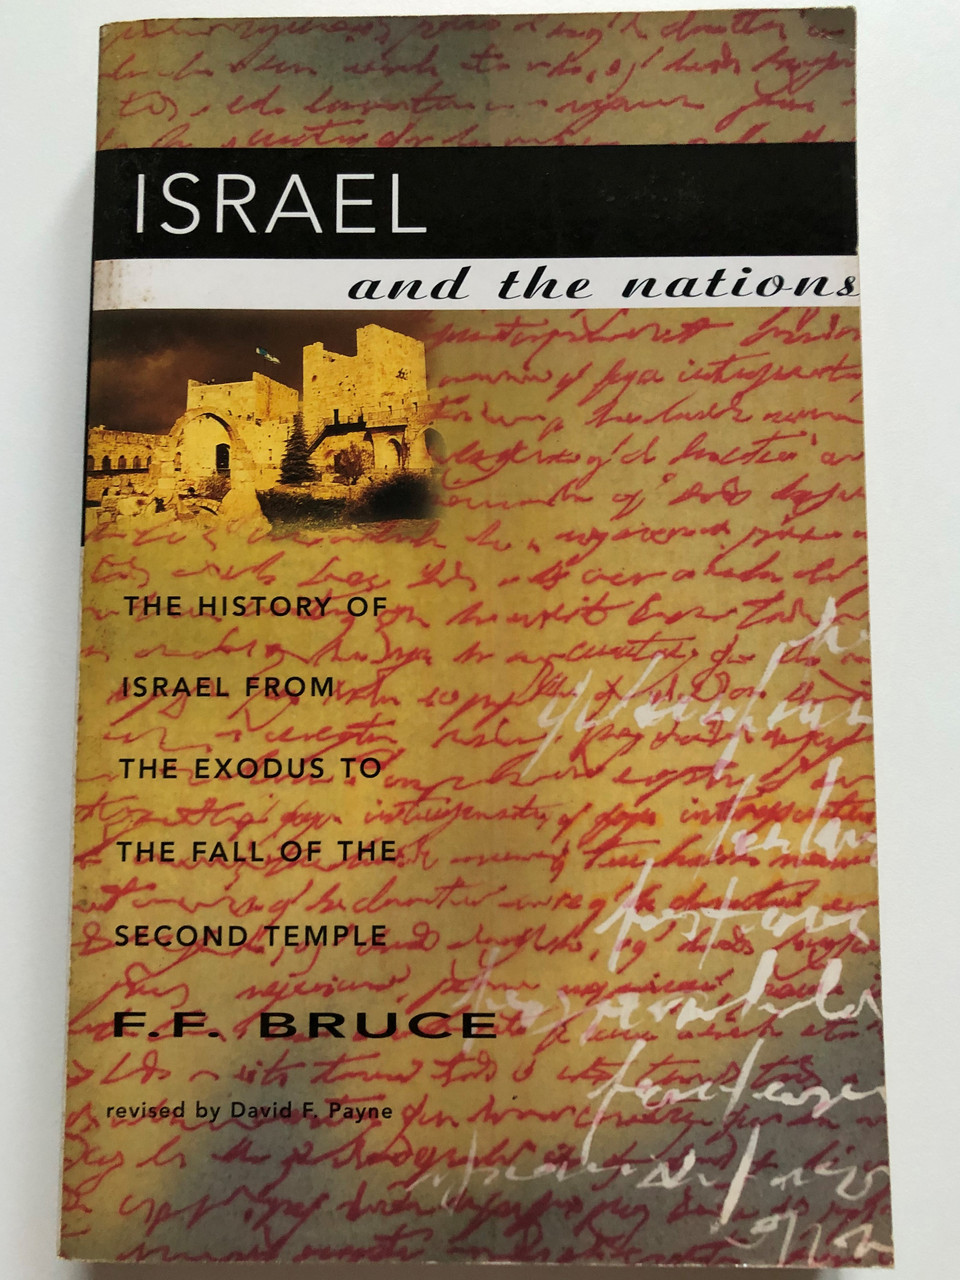 https://cdn10.bigcommerce.com/s-62bdpkt7pb/products/51773/images/263326/1_Israel_and_the_Nations_The_History_of_Israel_from_the_Exodus_to_the_Fall_of_the_Second_Temple_Author_F._F._Bruce_9780853647621_1__17613.1673083385.1280.1280.JPG?c=2&_gl=1*cjdmka*_ga*MjAyOTE0ODY1OS4xNTkyNDY2ODc5*_ga_WS2VZYPC6G*MTY3MzA2NzgxNS4yNjA0LjEuMTY3MzA4MzQzNy42MC4wLjA.